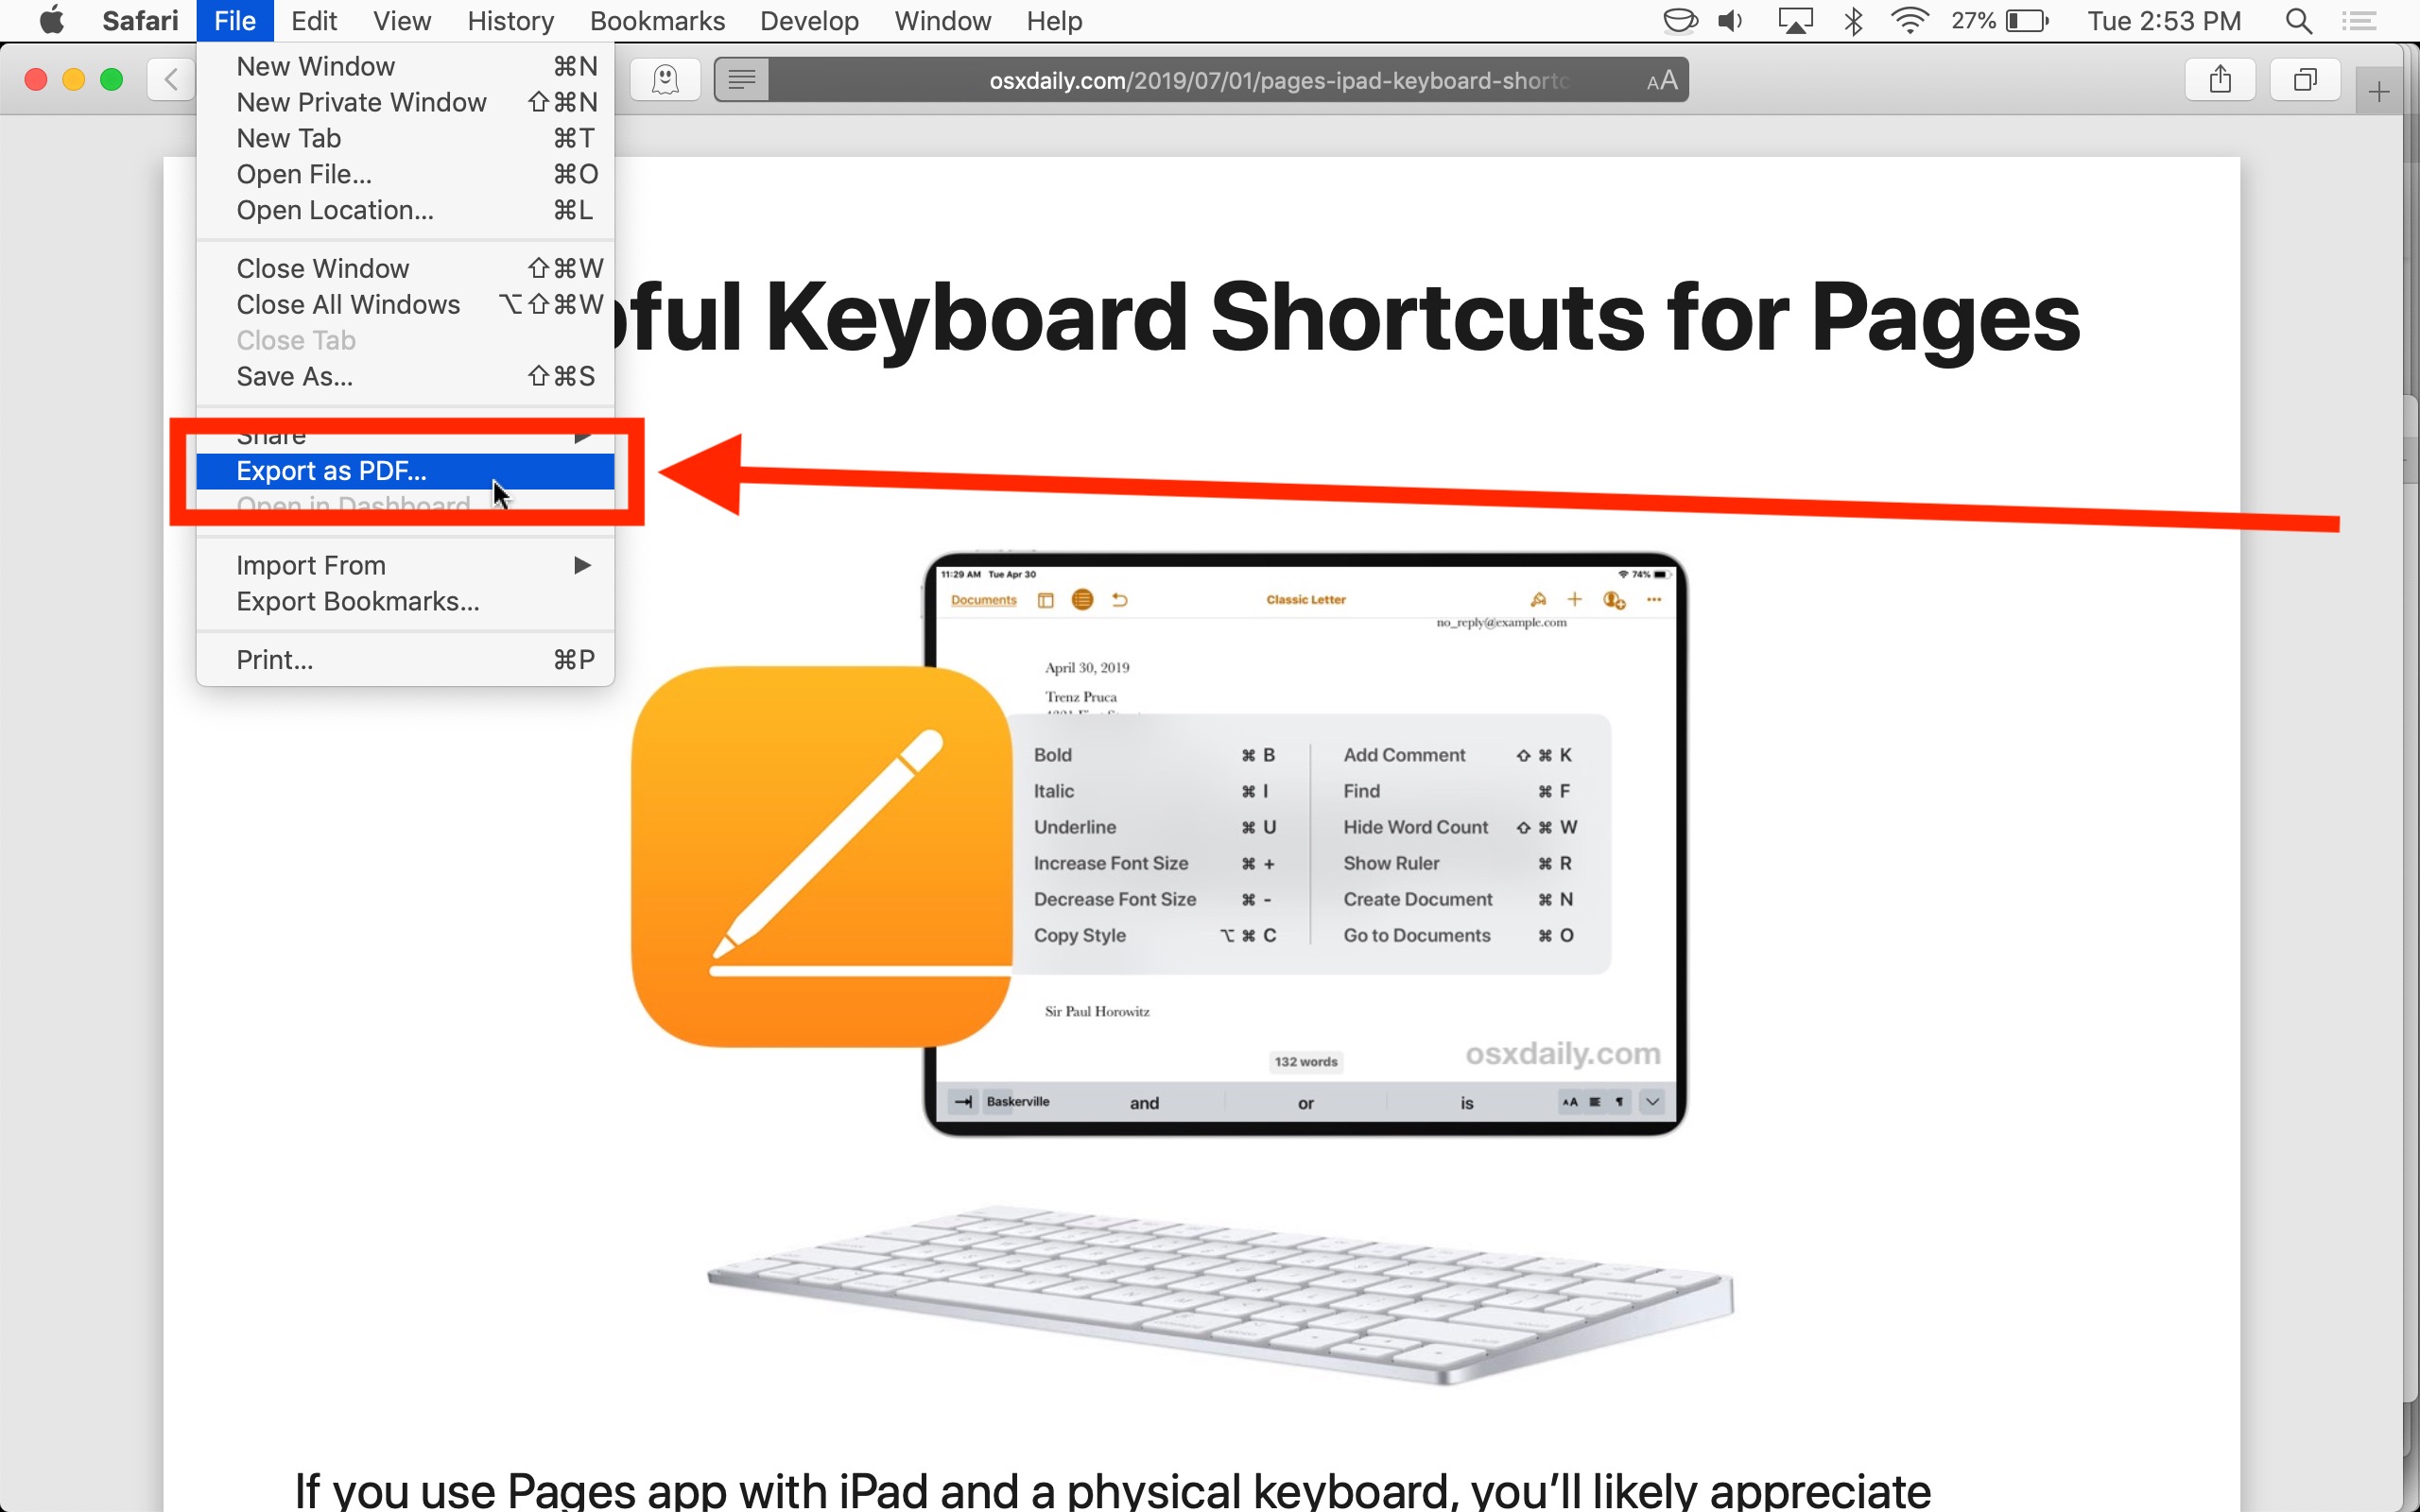 How To Save A Web Page As A PDF In Safari On The Mac